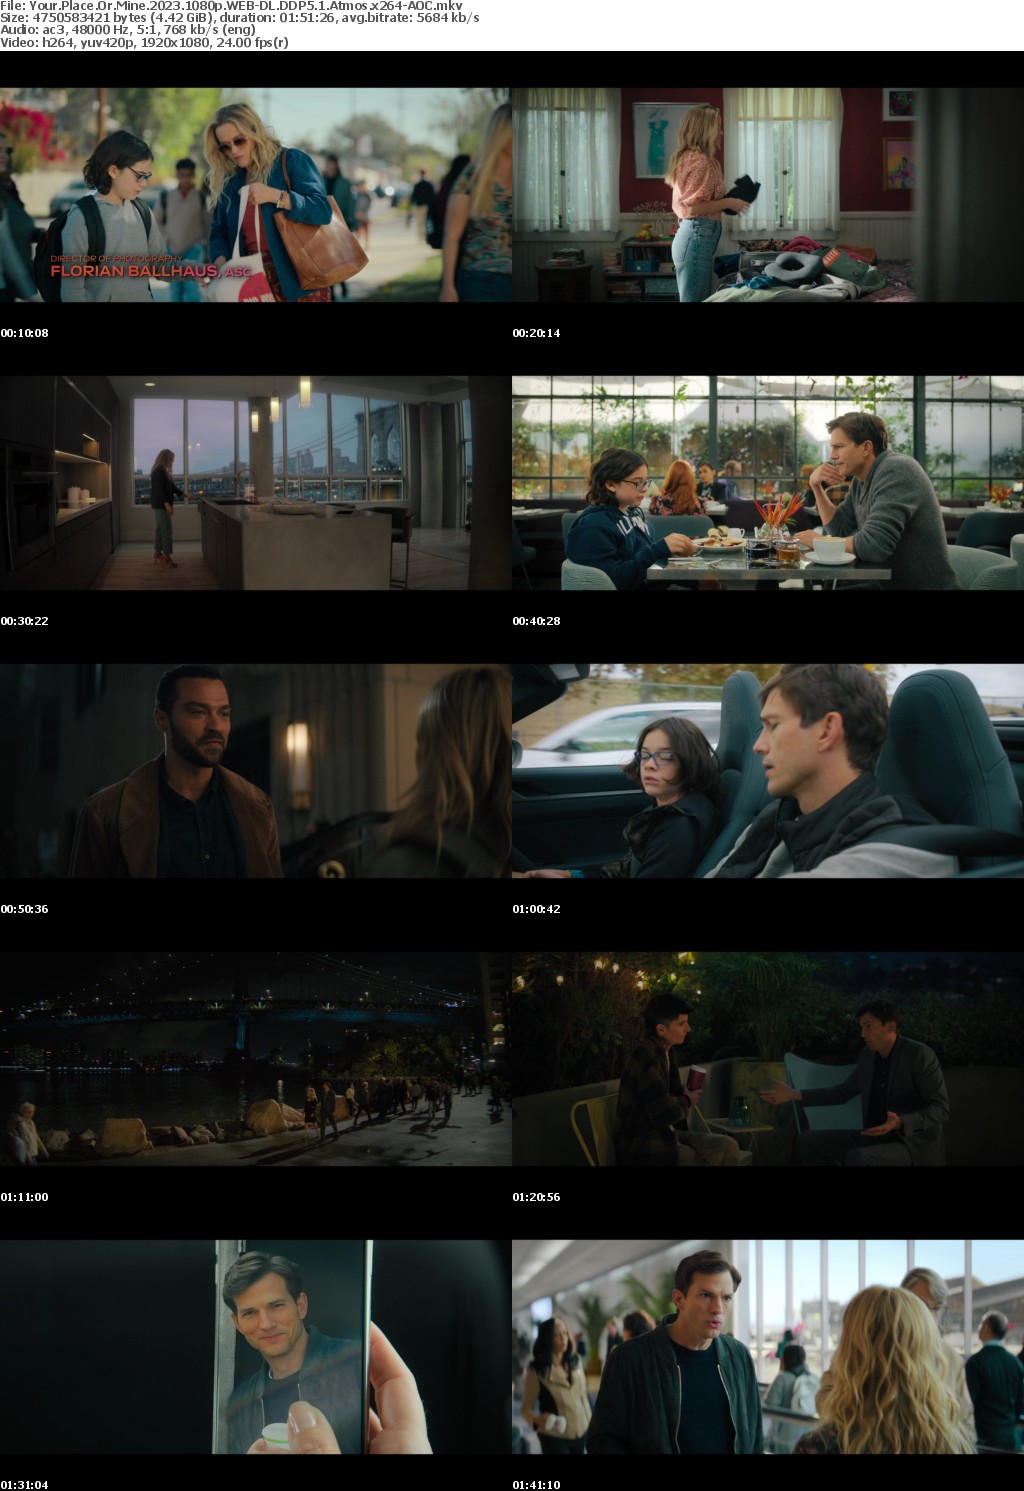 Your Place Or Mine 2023 1080p WEB-DL DDP5 1 Atmos x264-AOC